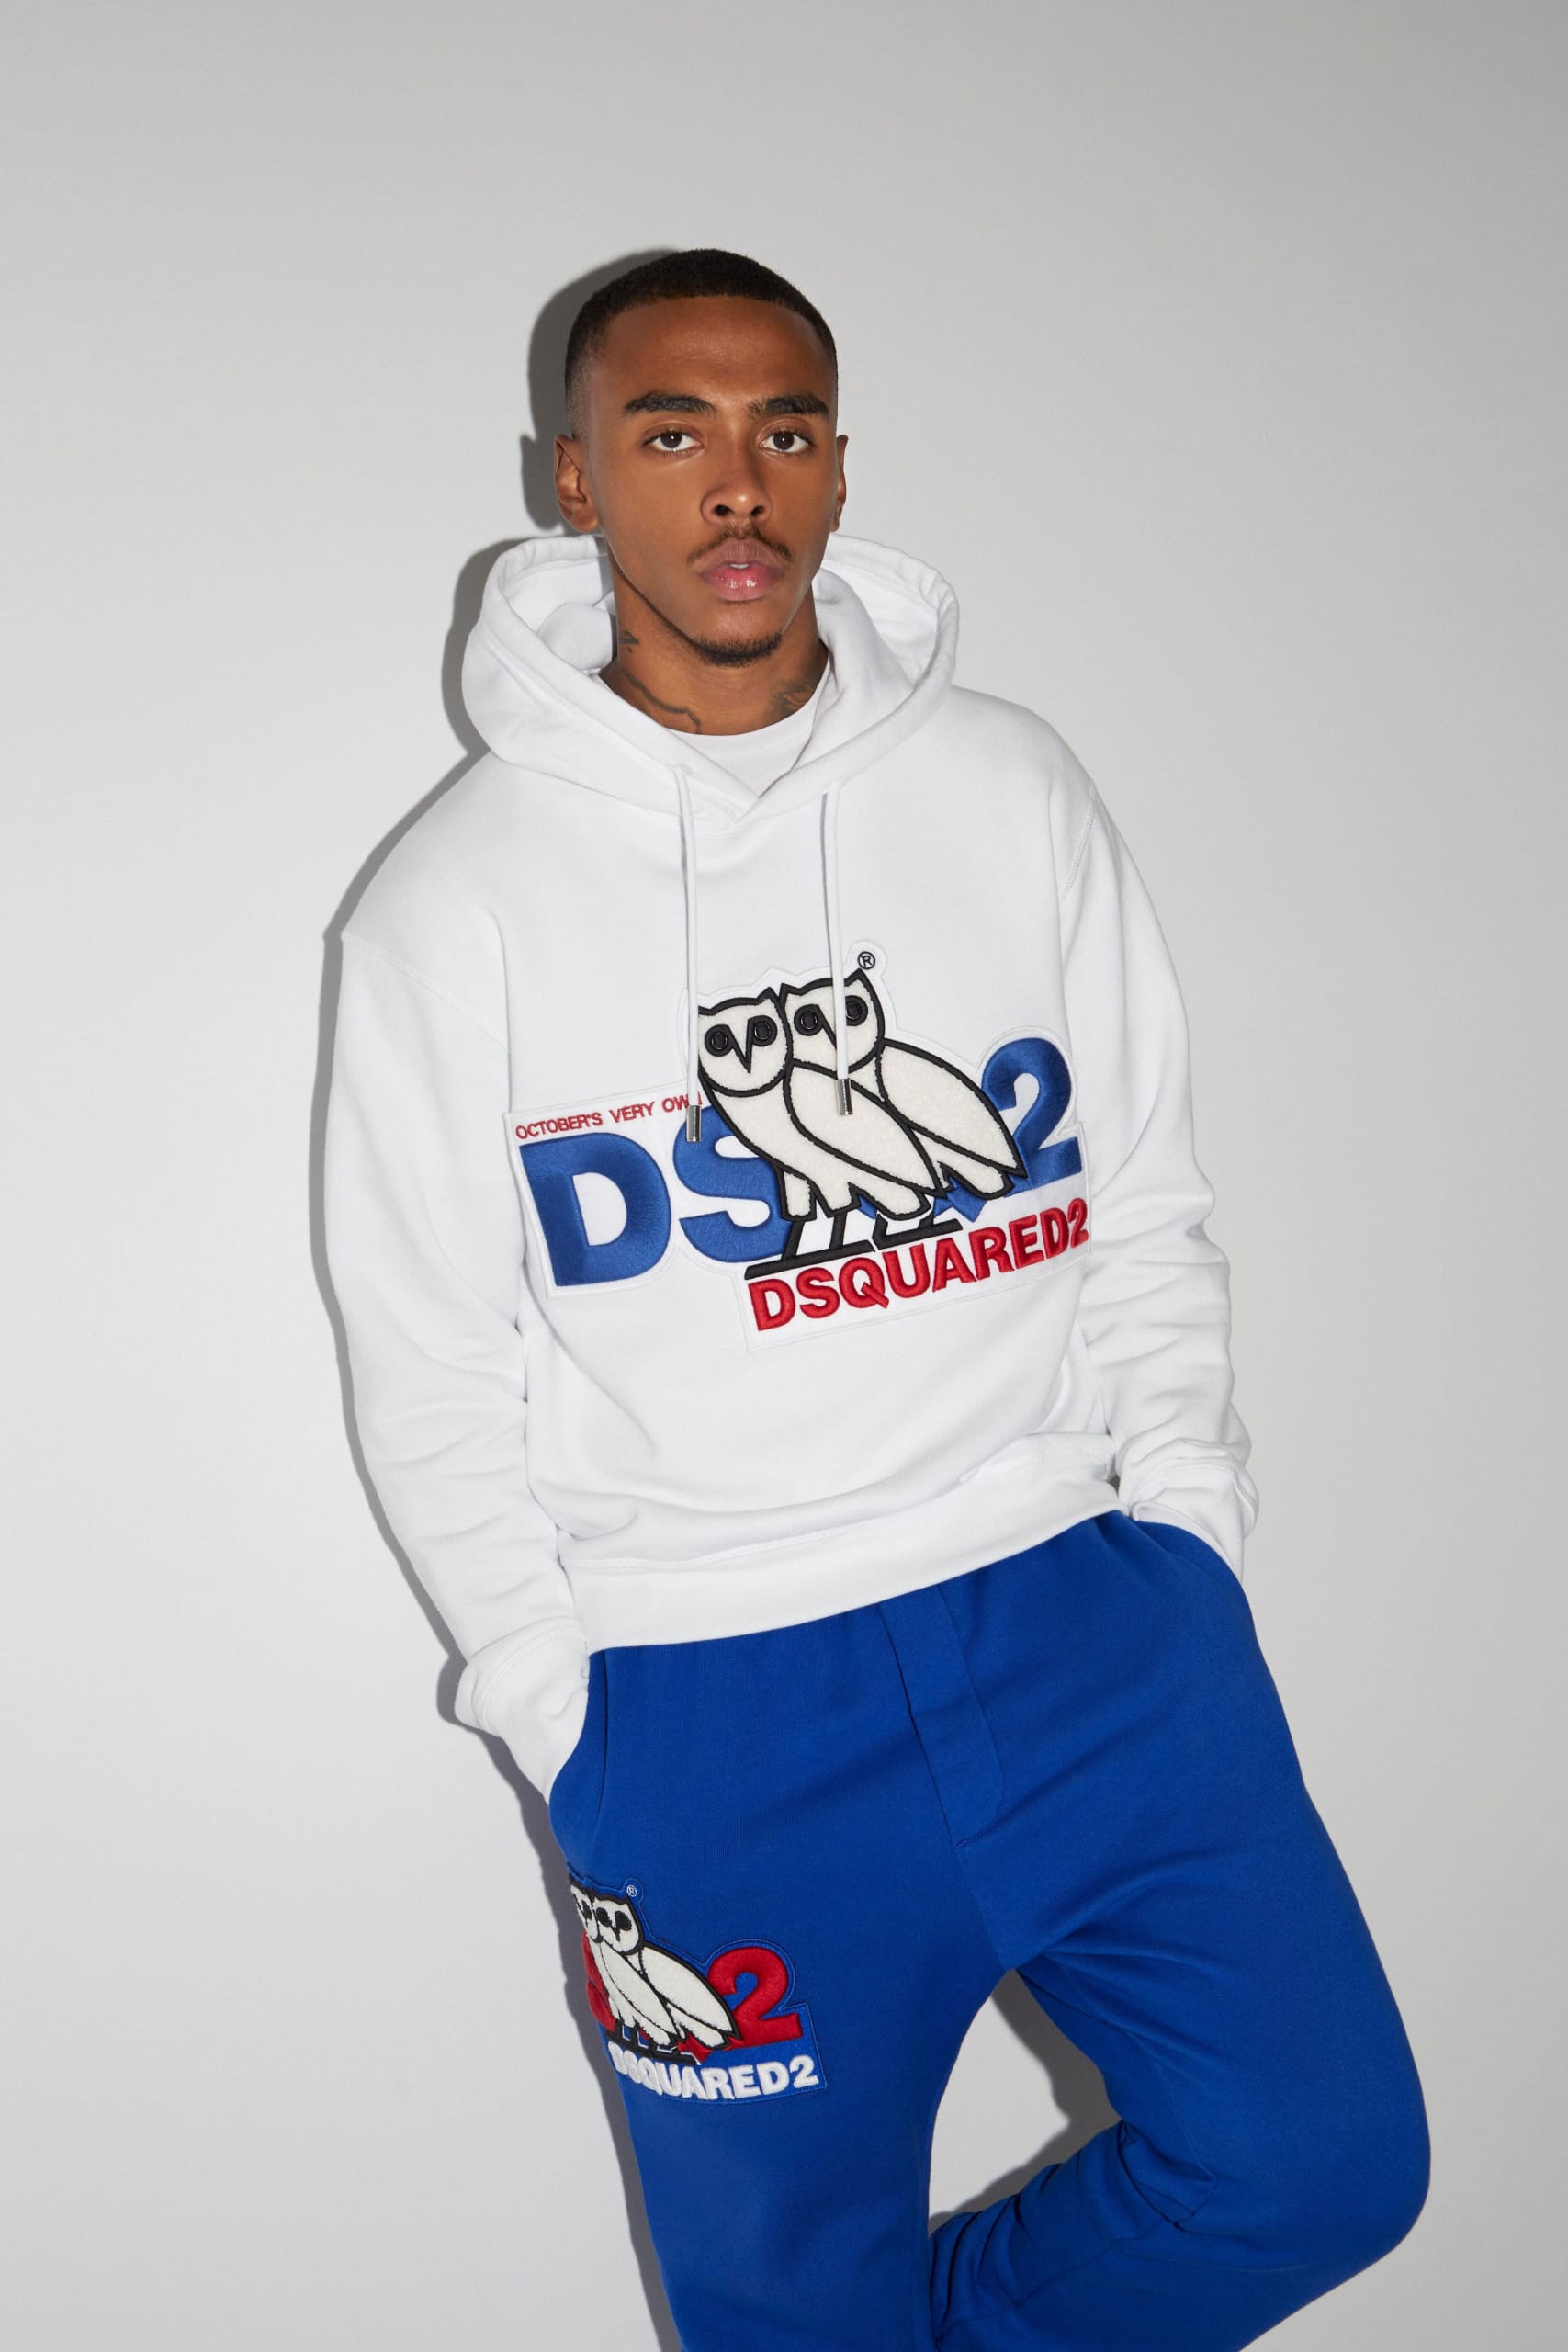 dsquared2 hoodie owl